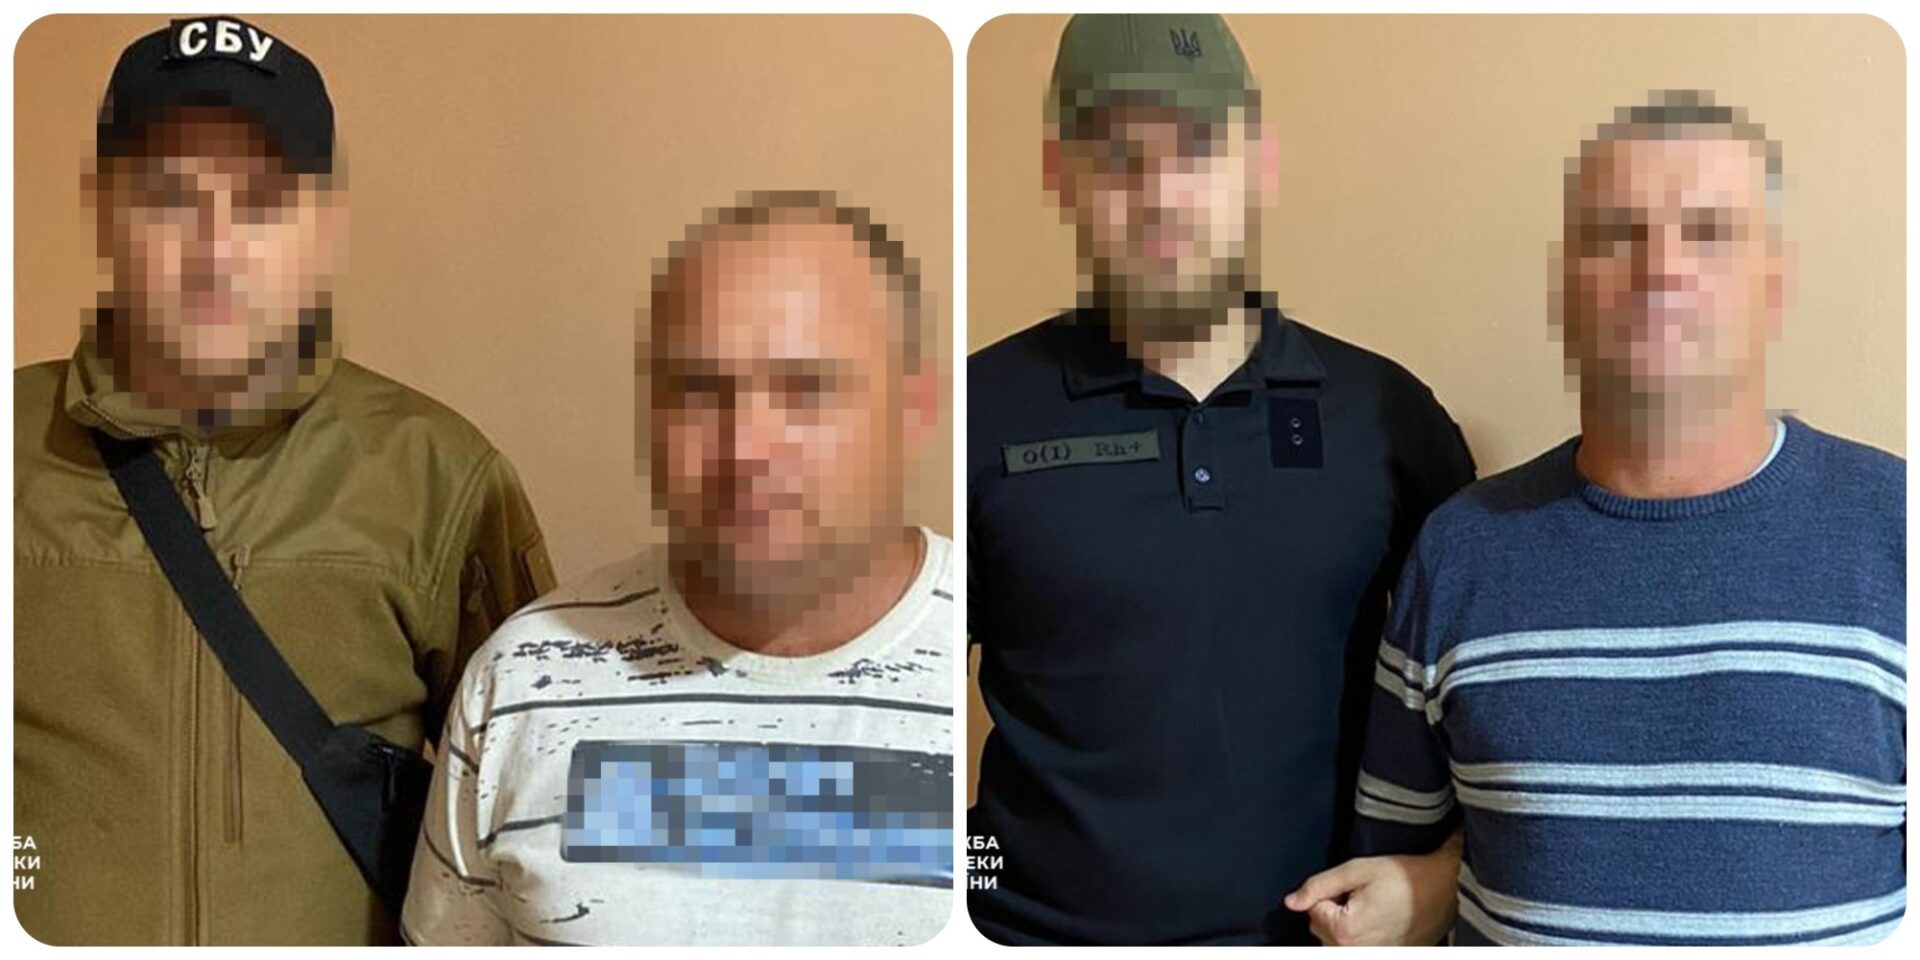 SBU nabs 2 Russian collaborators for cooperating with Russian troops in Kherson (image courtesy: Facebook)